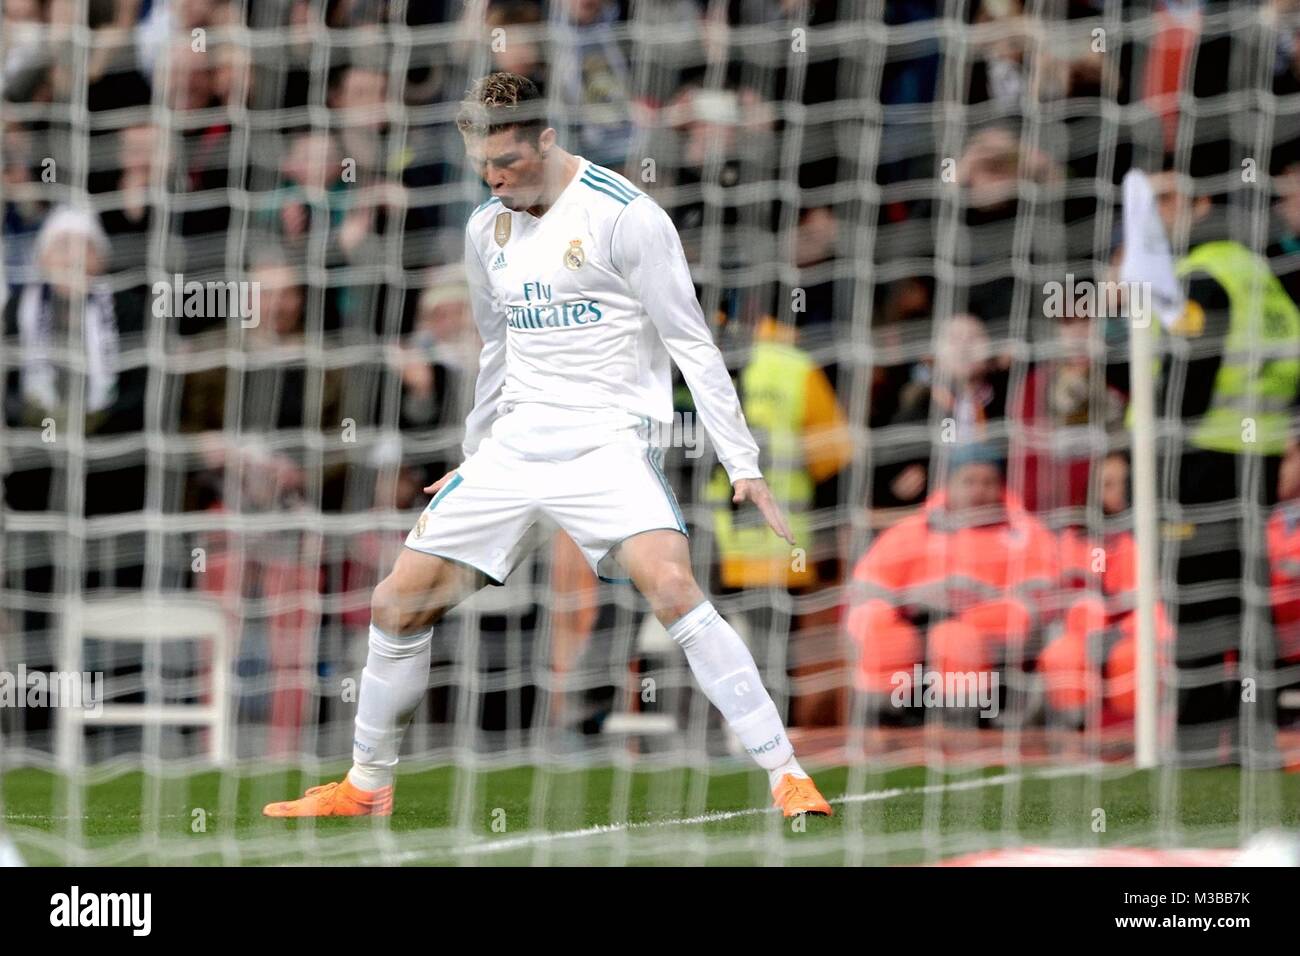 Madrid, Spain. 10th Feb, 2018. Real Madrid's Cristiano Ronaldo celebrate his goal during a Spanish league match between Real Madrid and Real Sociedad in Madrid, Spain, on Feb. 10, 2018. Real Madrid won 5-2. Credit: Juan Carlos Rojas/Xinhua/Alamy Live News Stock Photo